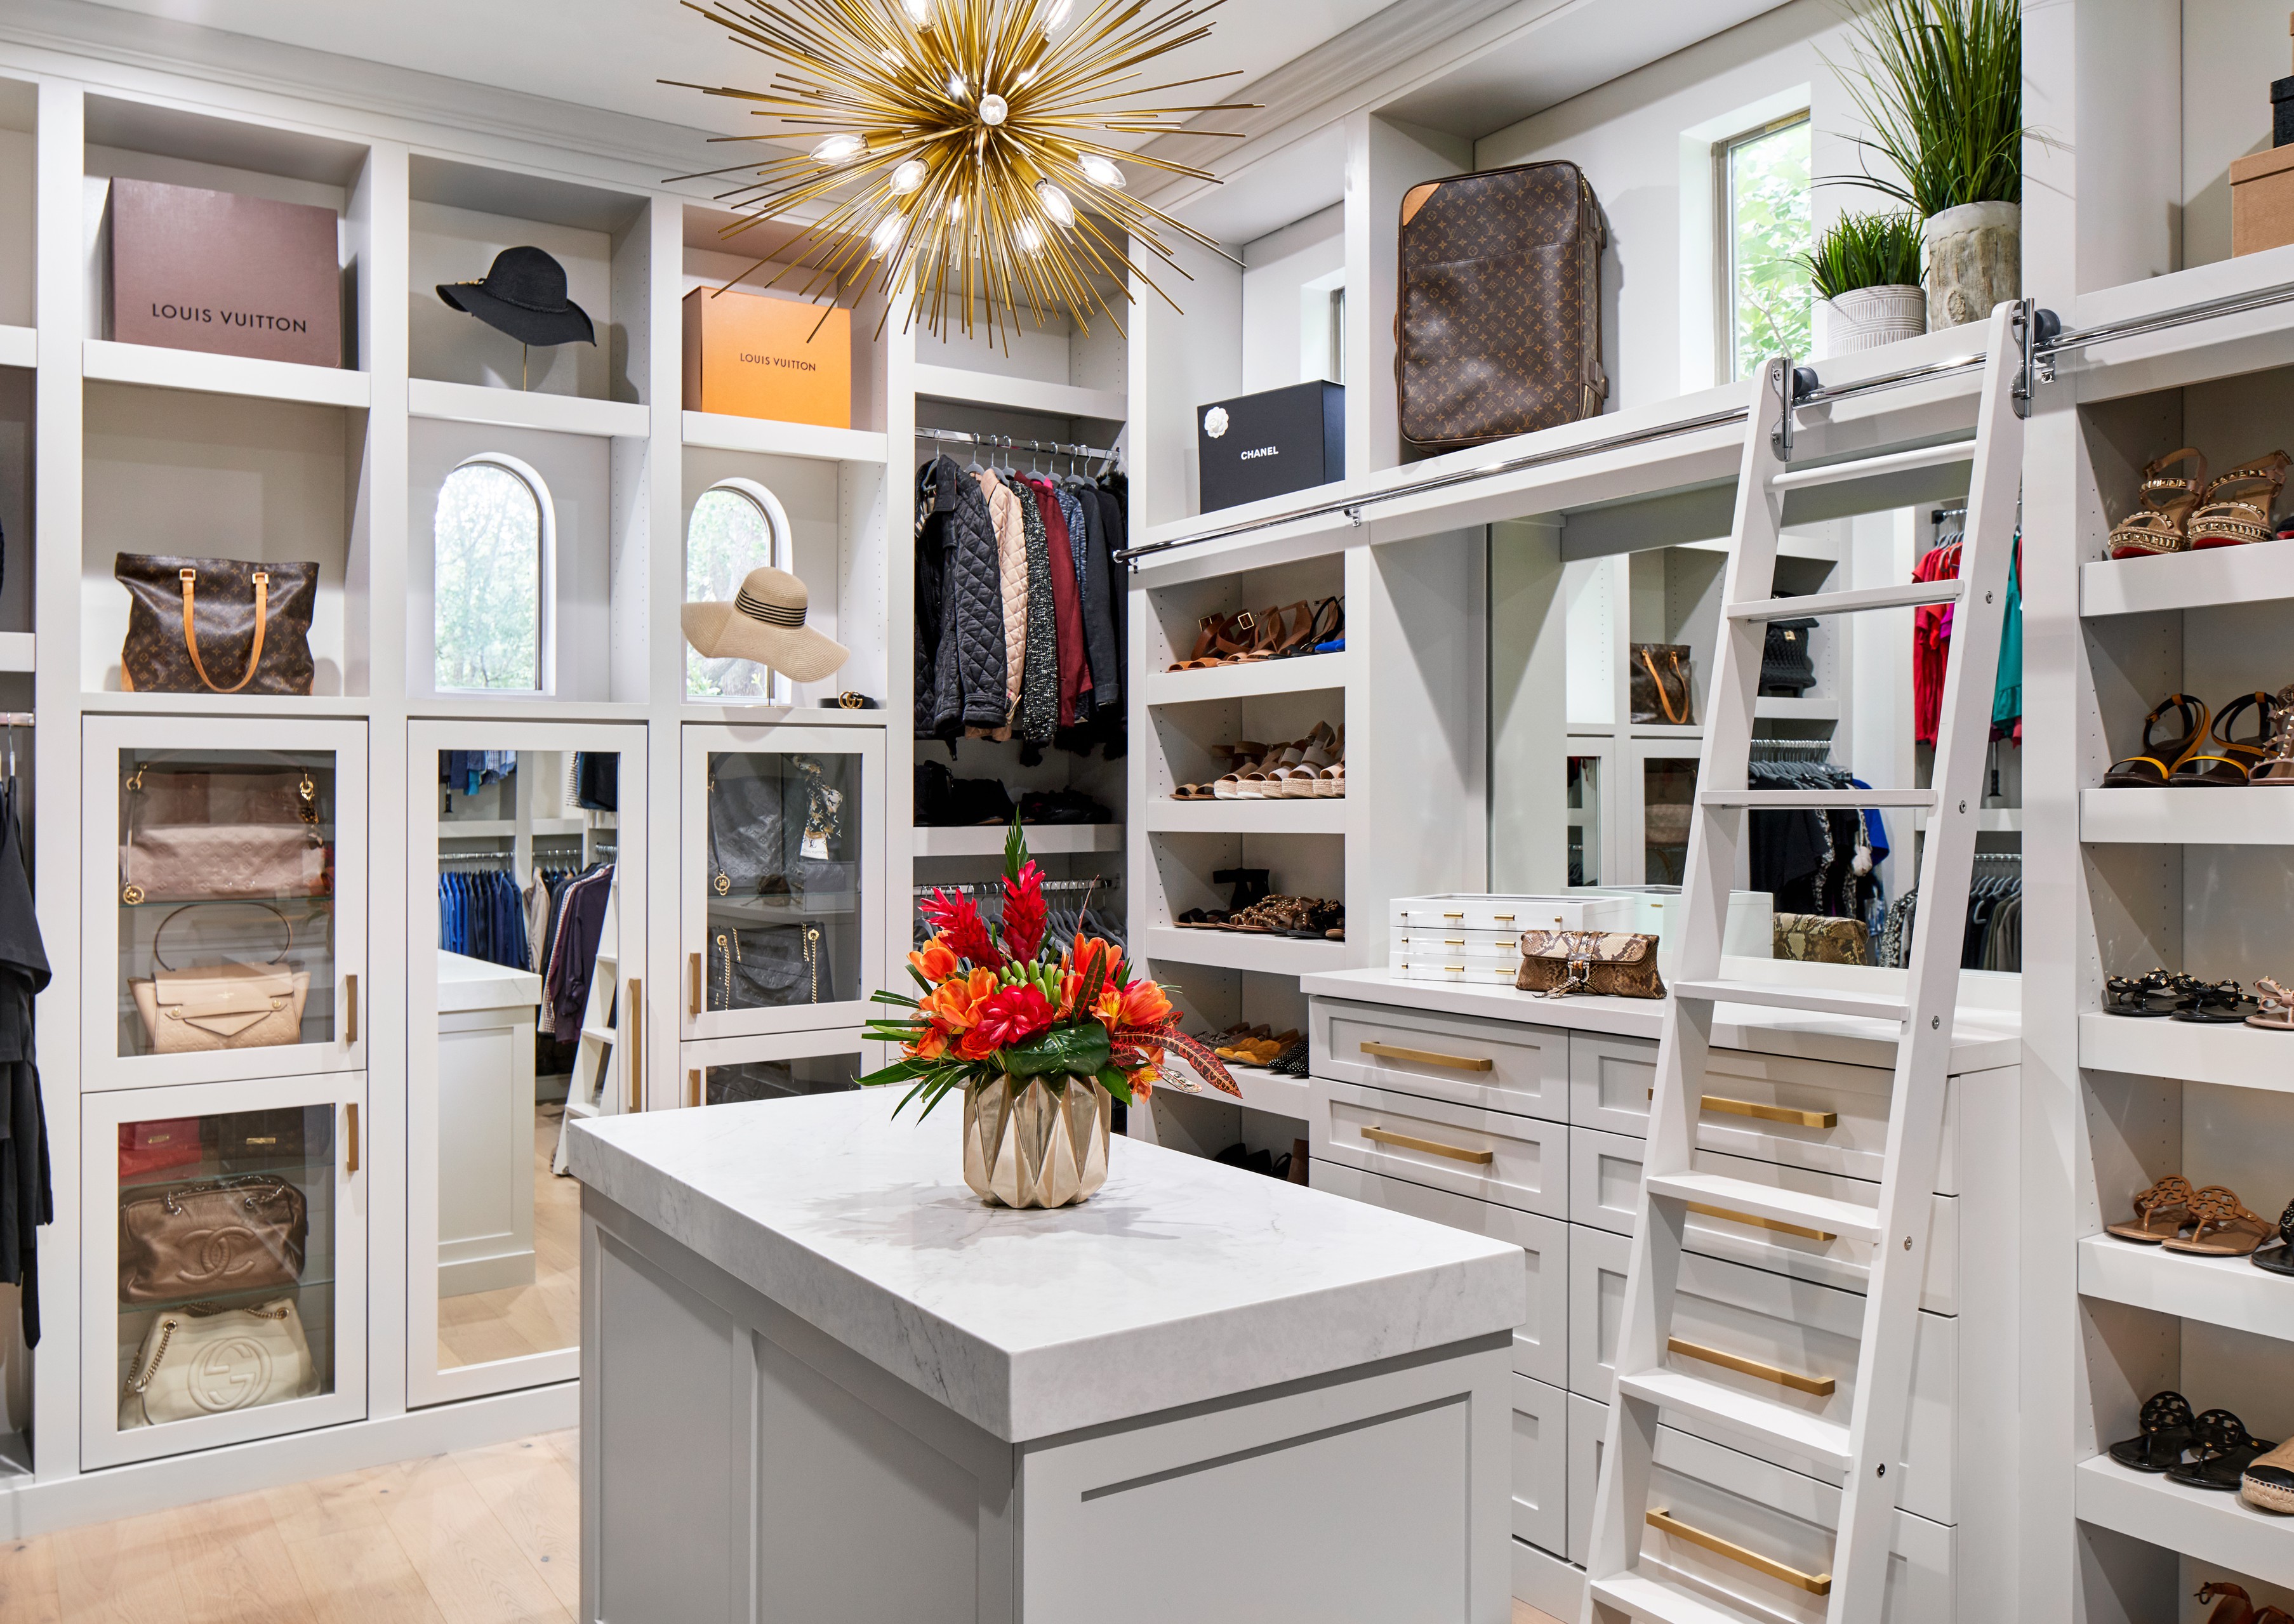 35 Best Walk In Closet Ideas and Designs for Master Bedrooms